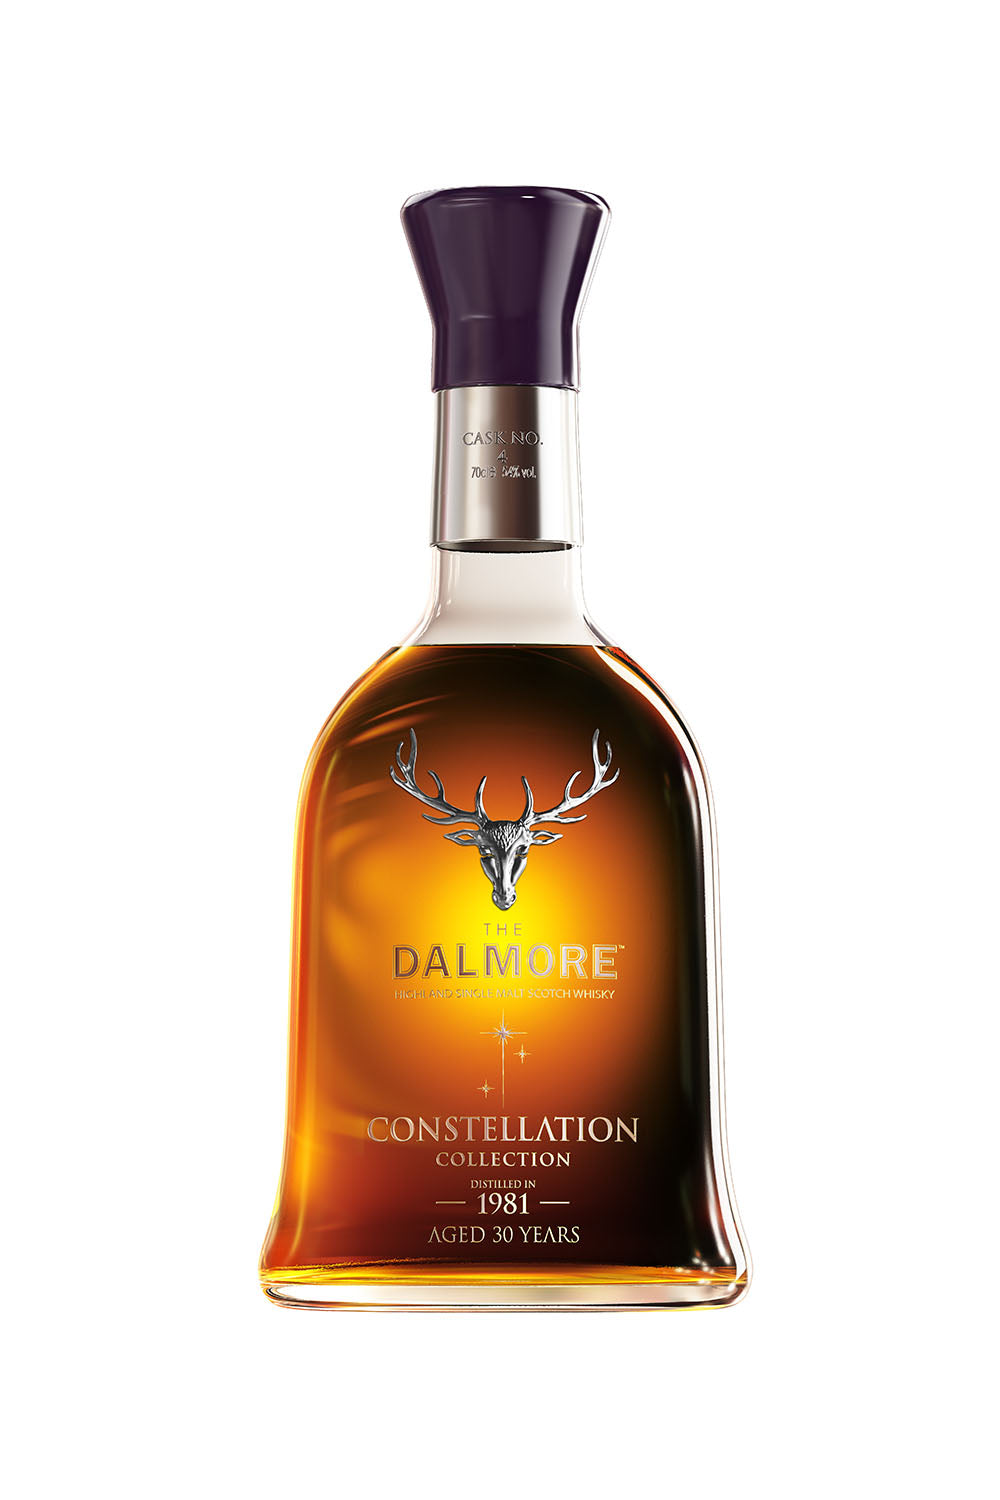 The Dalmore 1981 Constellation - Cask 4